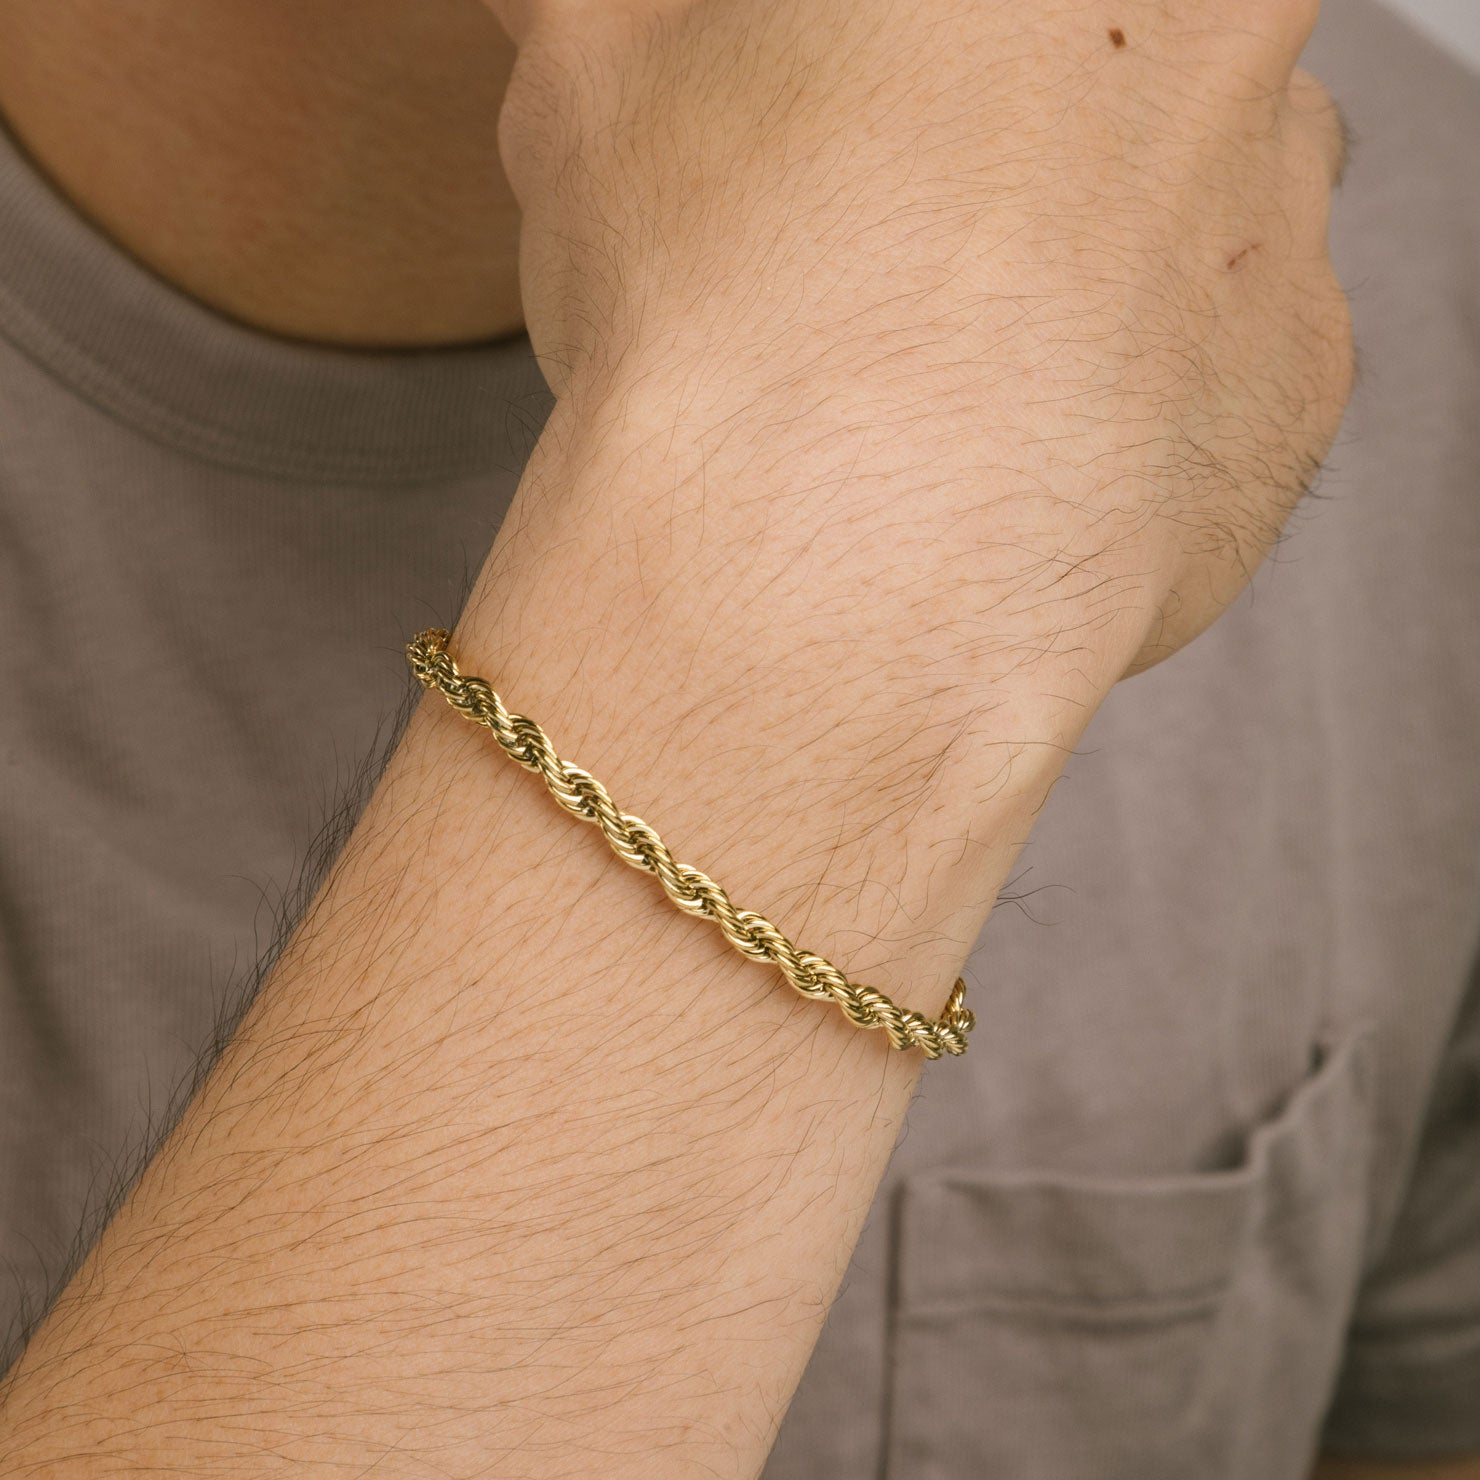 A model wearing the Twist Rope Chain Bracelet in Gold is crafted with high-quality 18K Gold plating, and features a length of 18cm and width of 4mm. Enjoy the additional benefits of its non-tarnish and water-resistant properties.